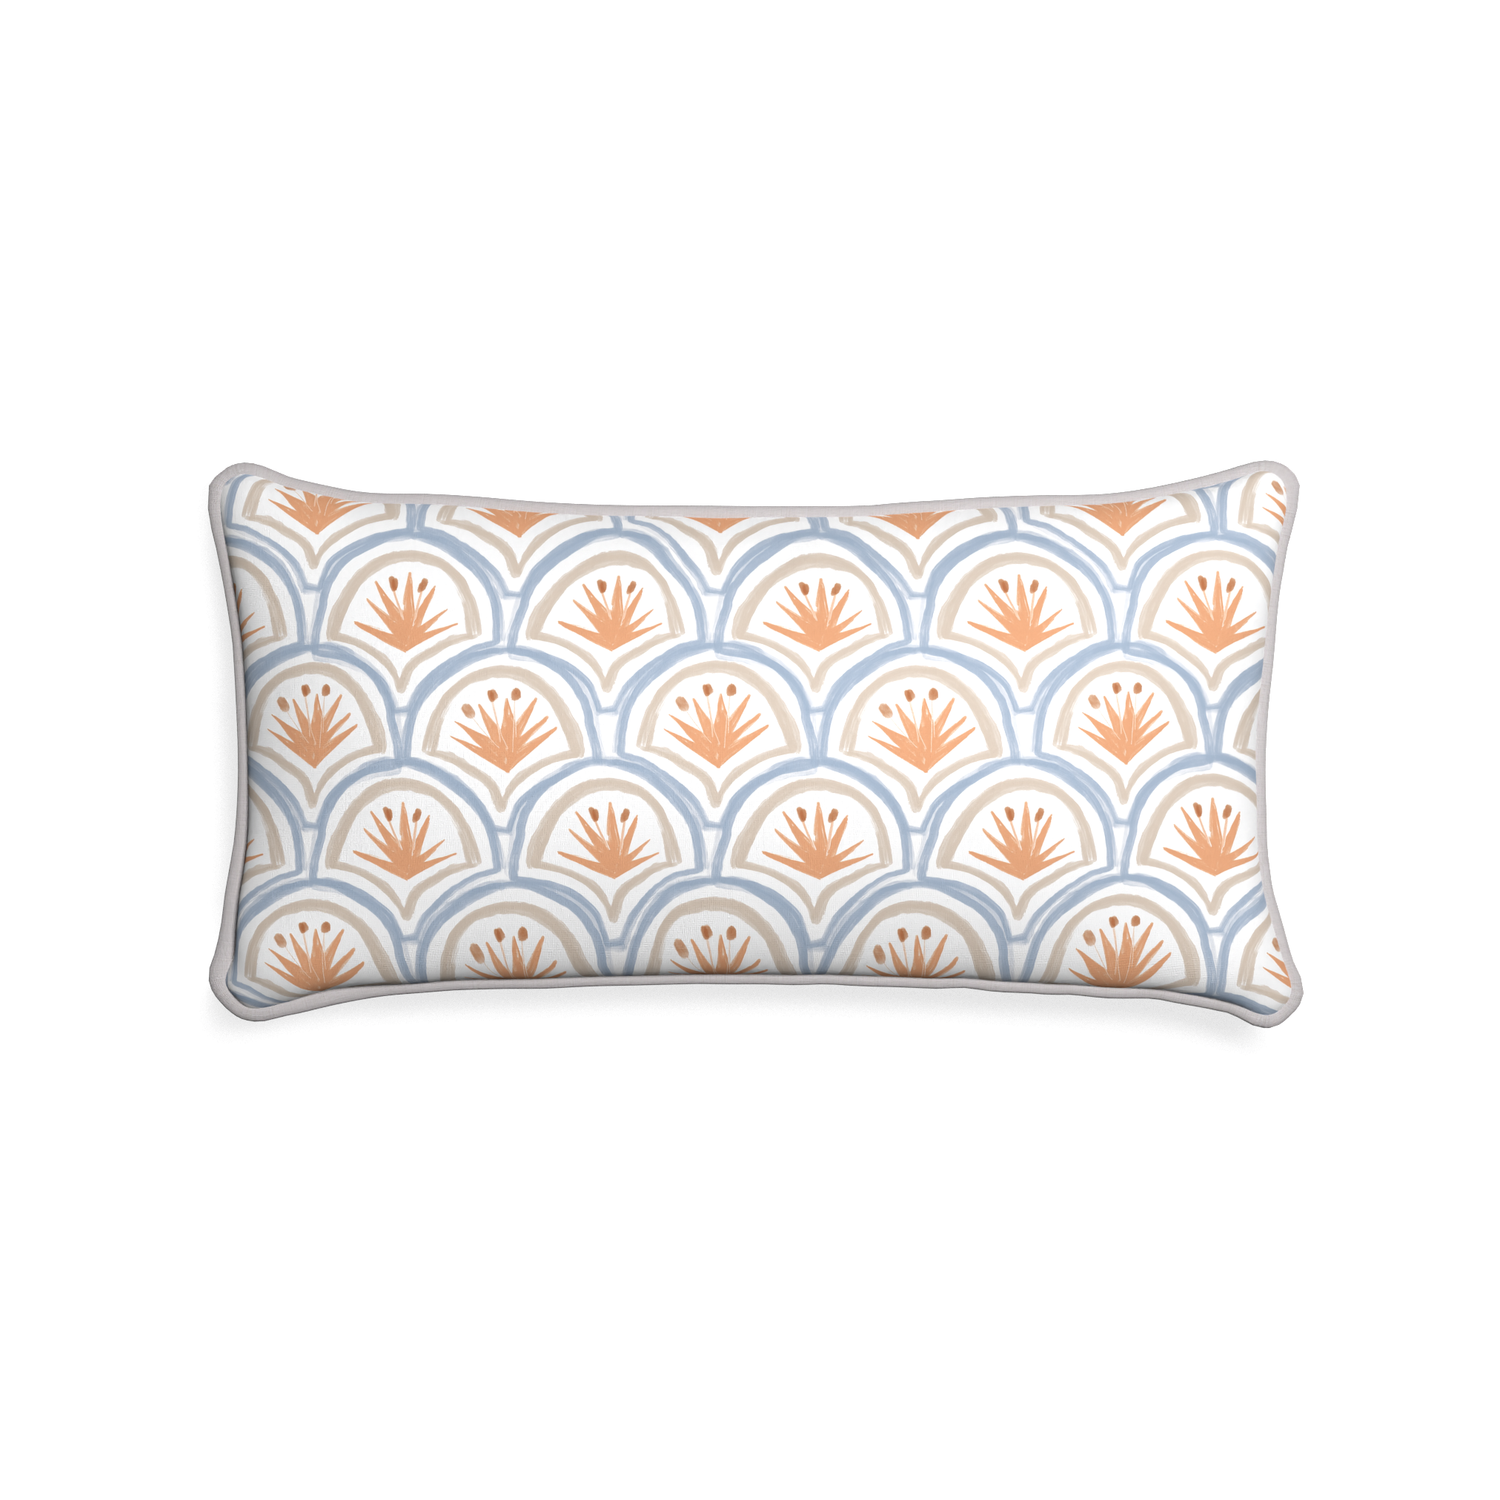 Midi-lumbar thatcher apricot custom art deco palm patternpillow with pebble piping on white background